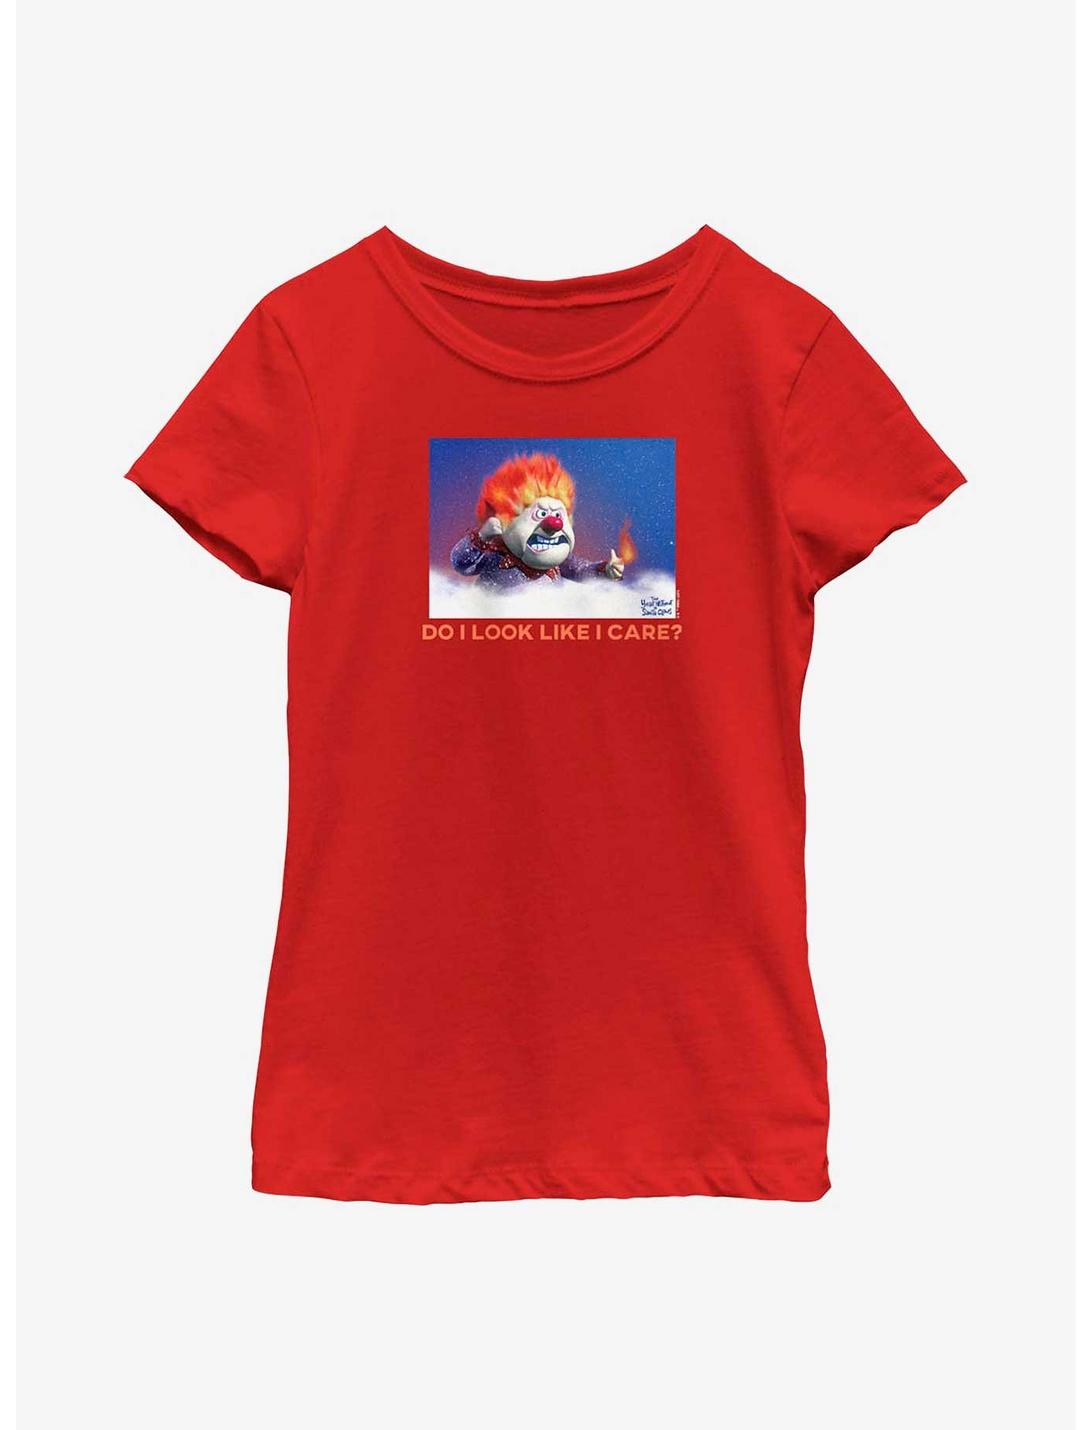 The Year Without Santa Claus Heat Miser Care? Youth Girls T-Shirt, RED, hi-res